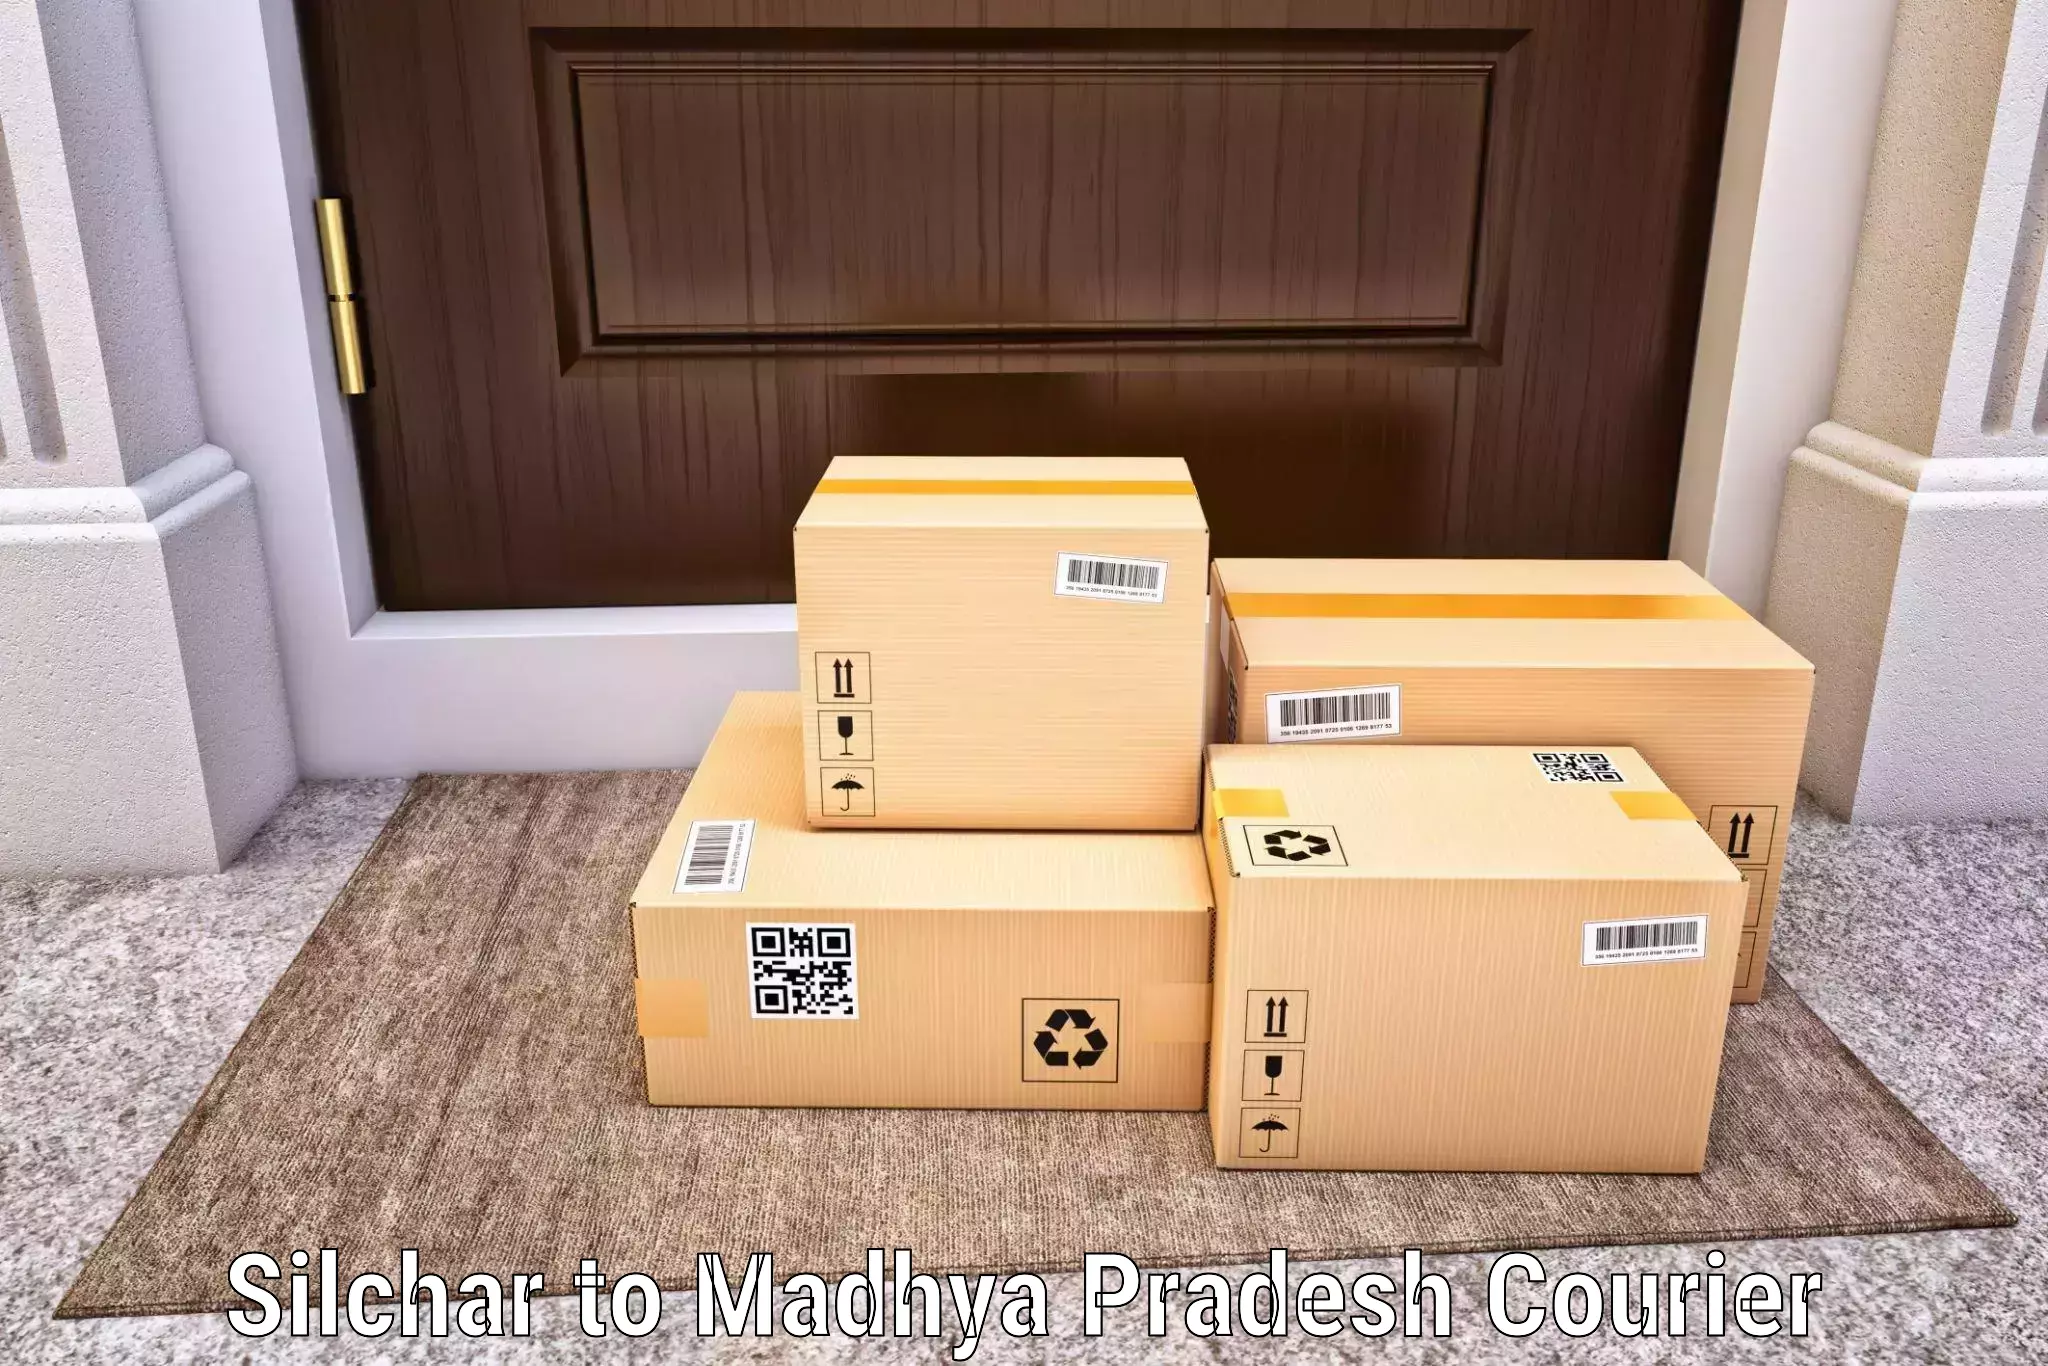 E-commerce shipping in Silchar to Manawar